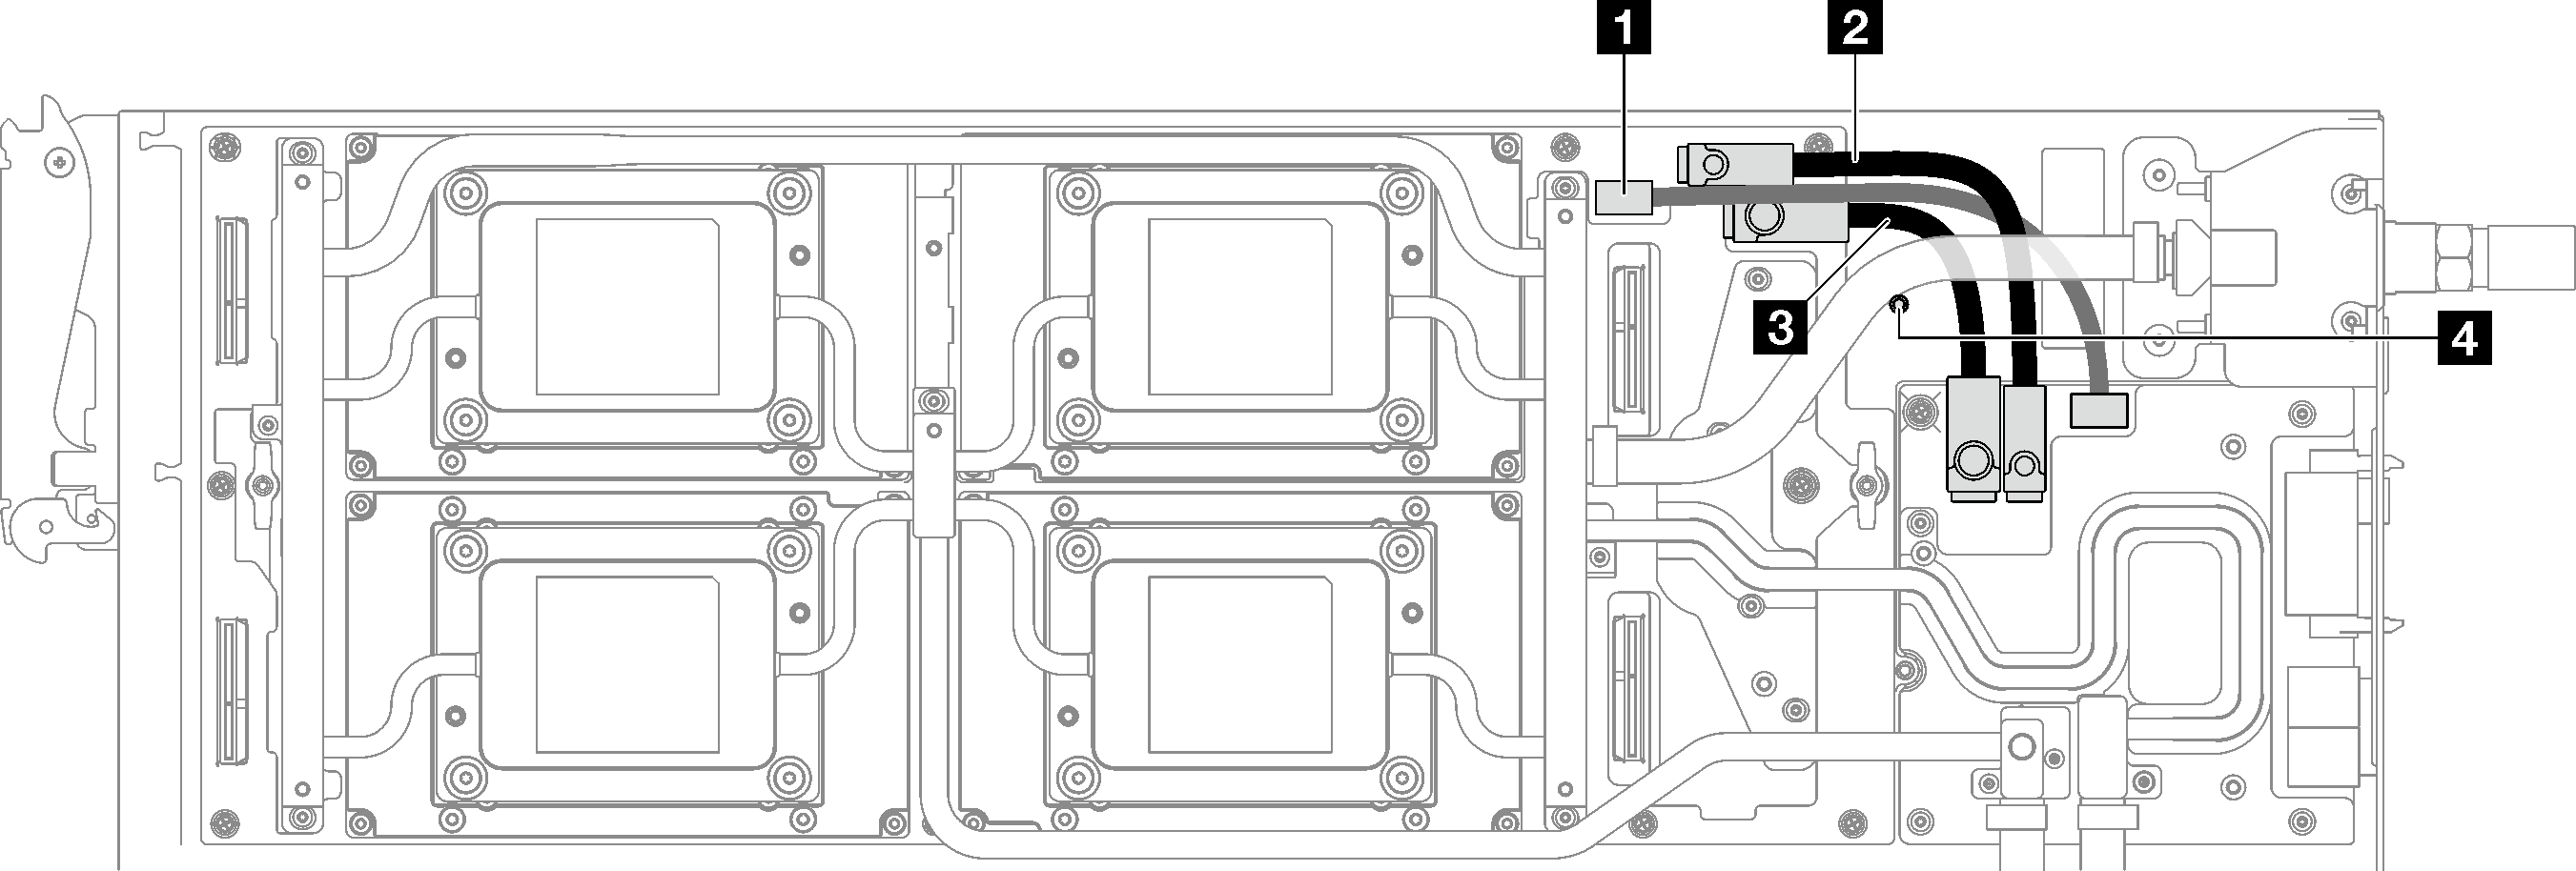 SD650-I V3 tray power cable routing